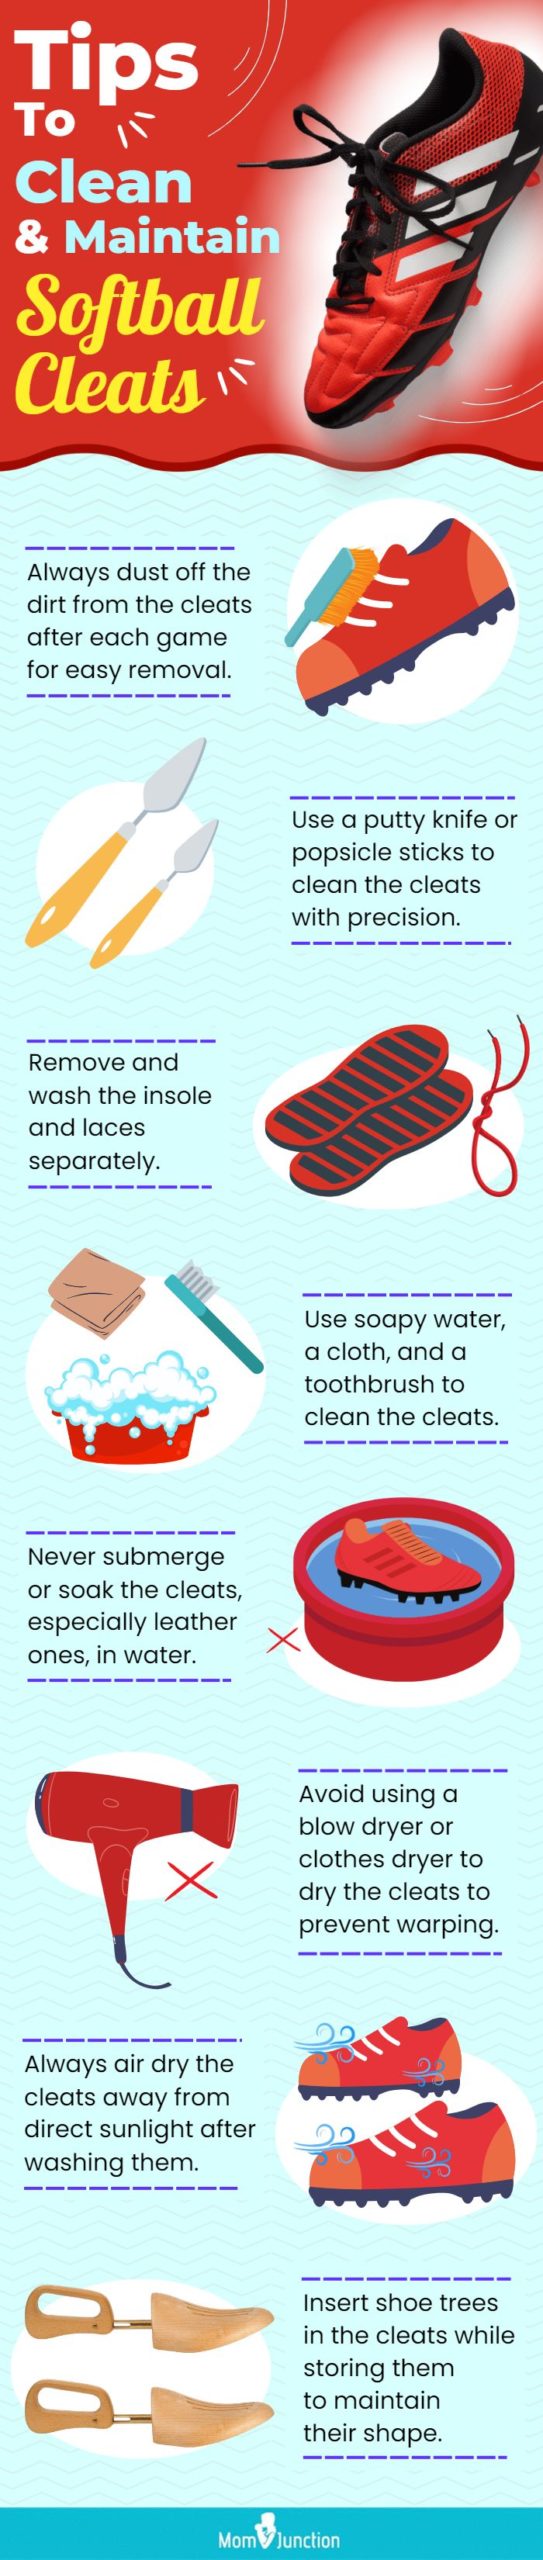 Tips To Clean And Maintain Softball Cleats (infographic)